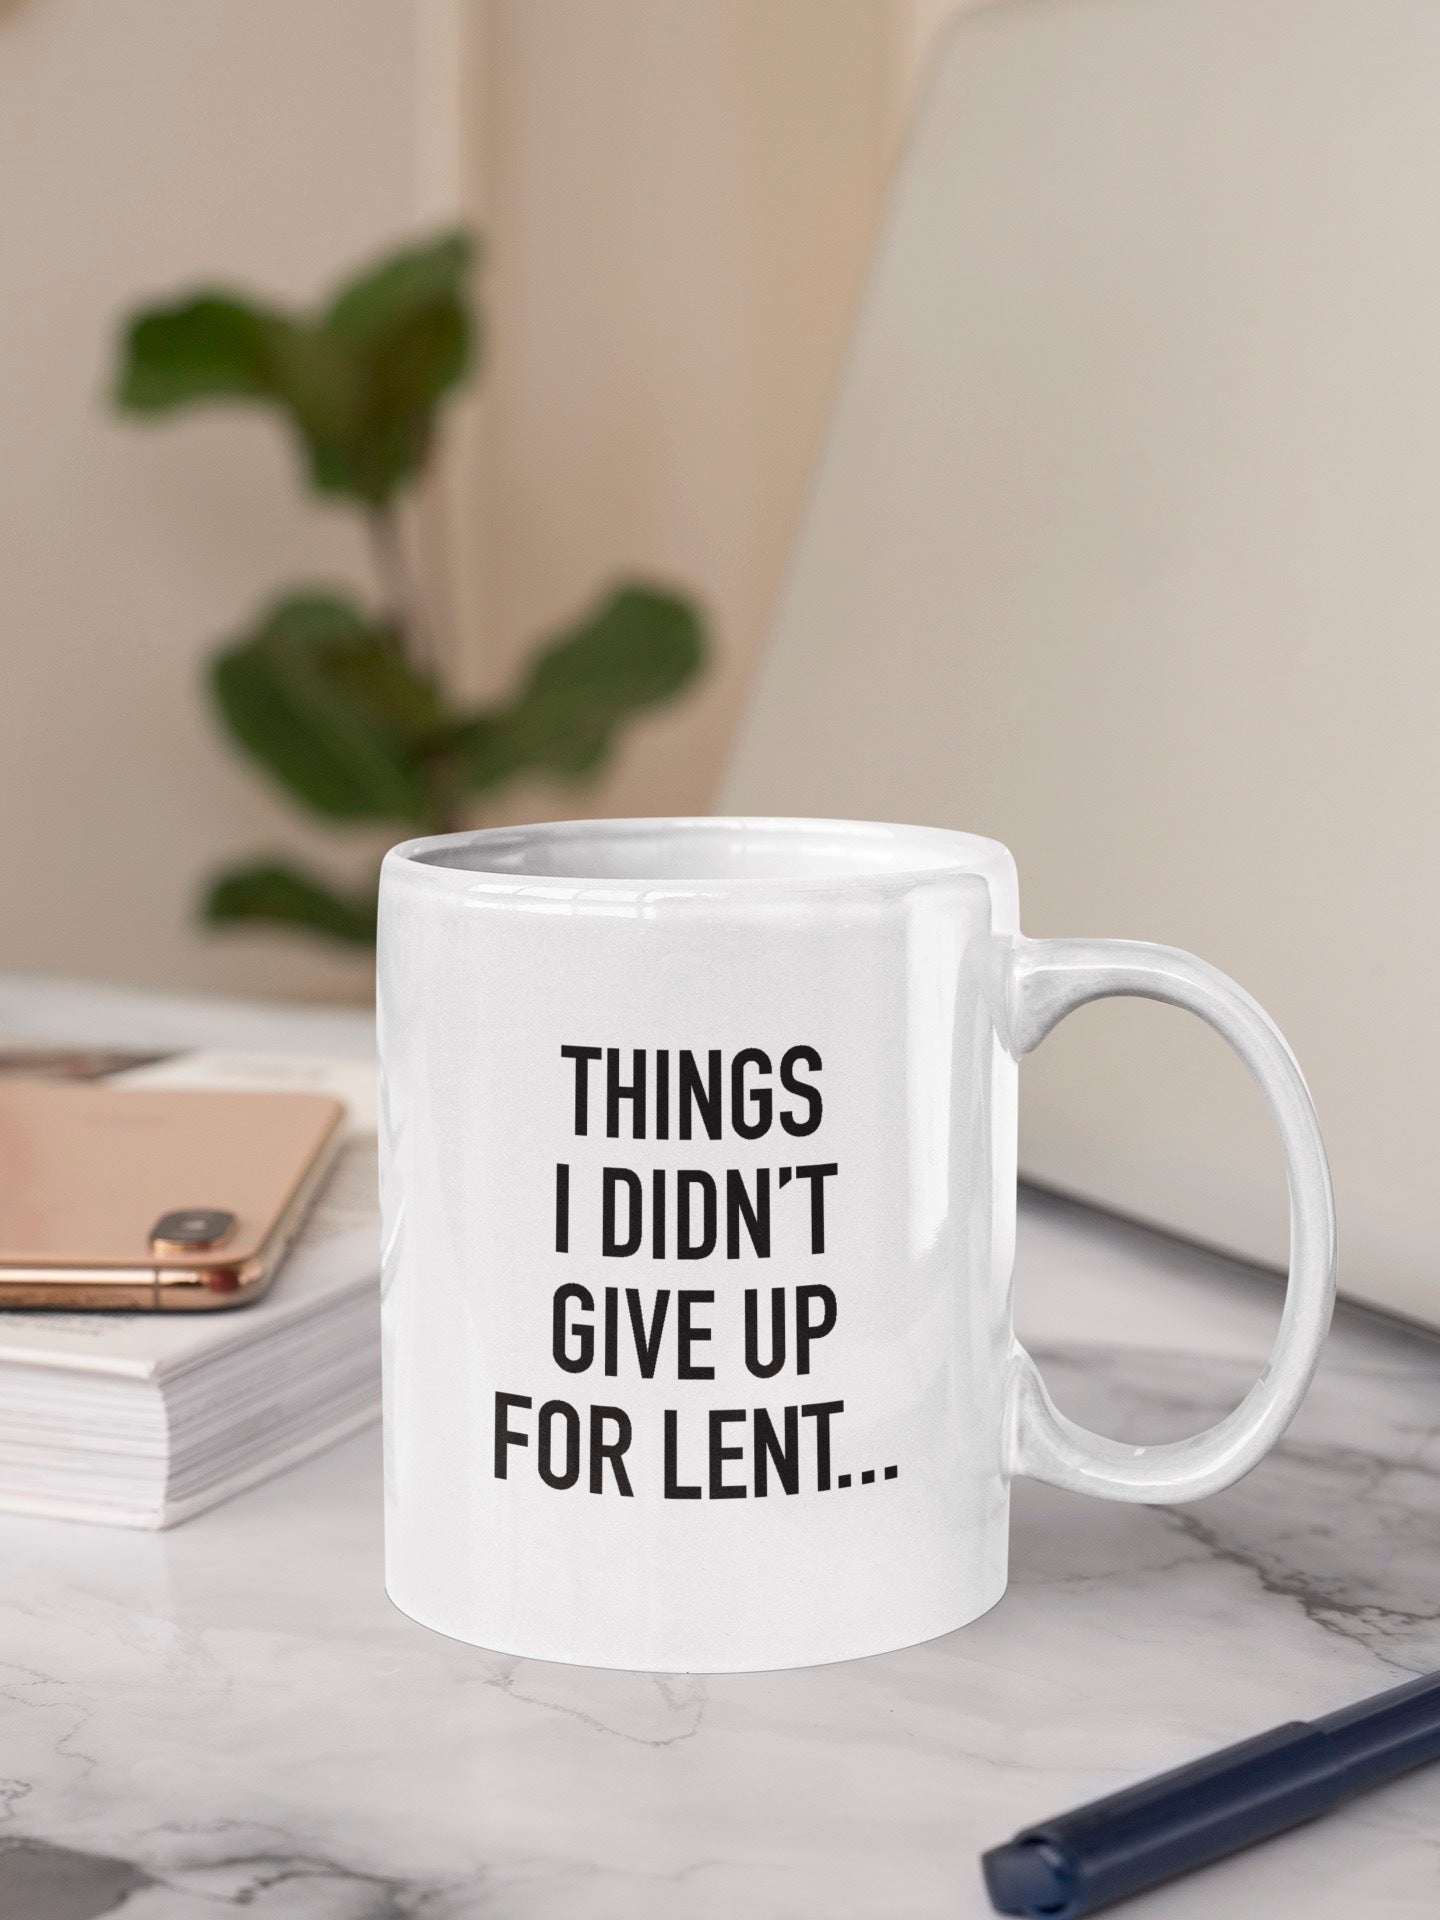 Things I Didn't Give Up For Lent... Coffee Mug - 11 oz.